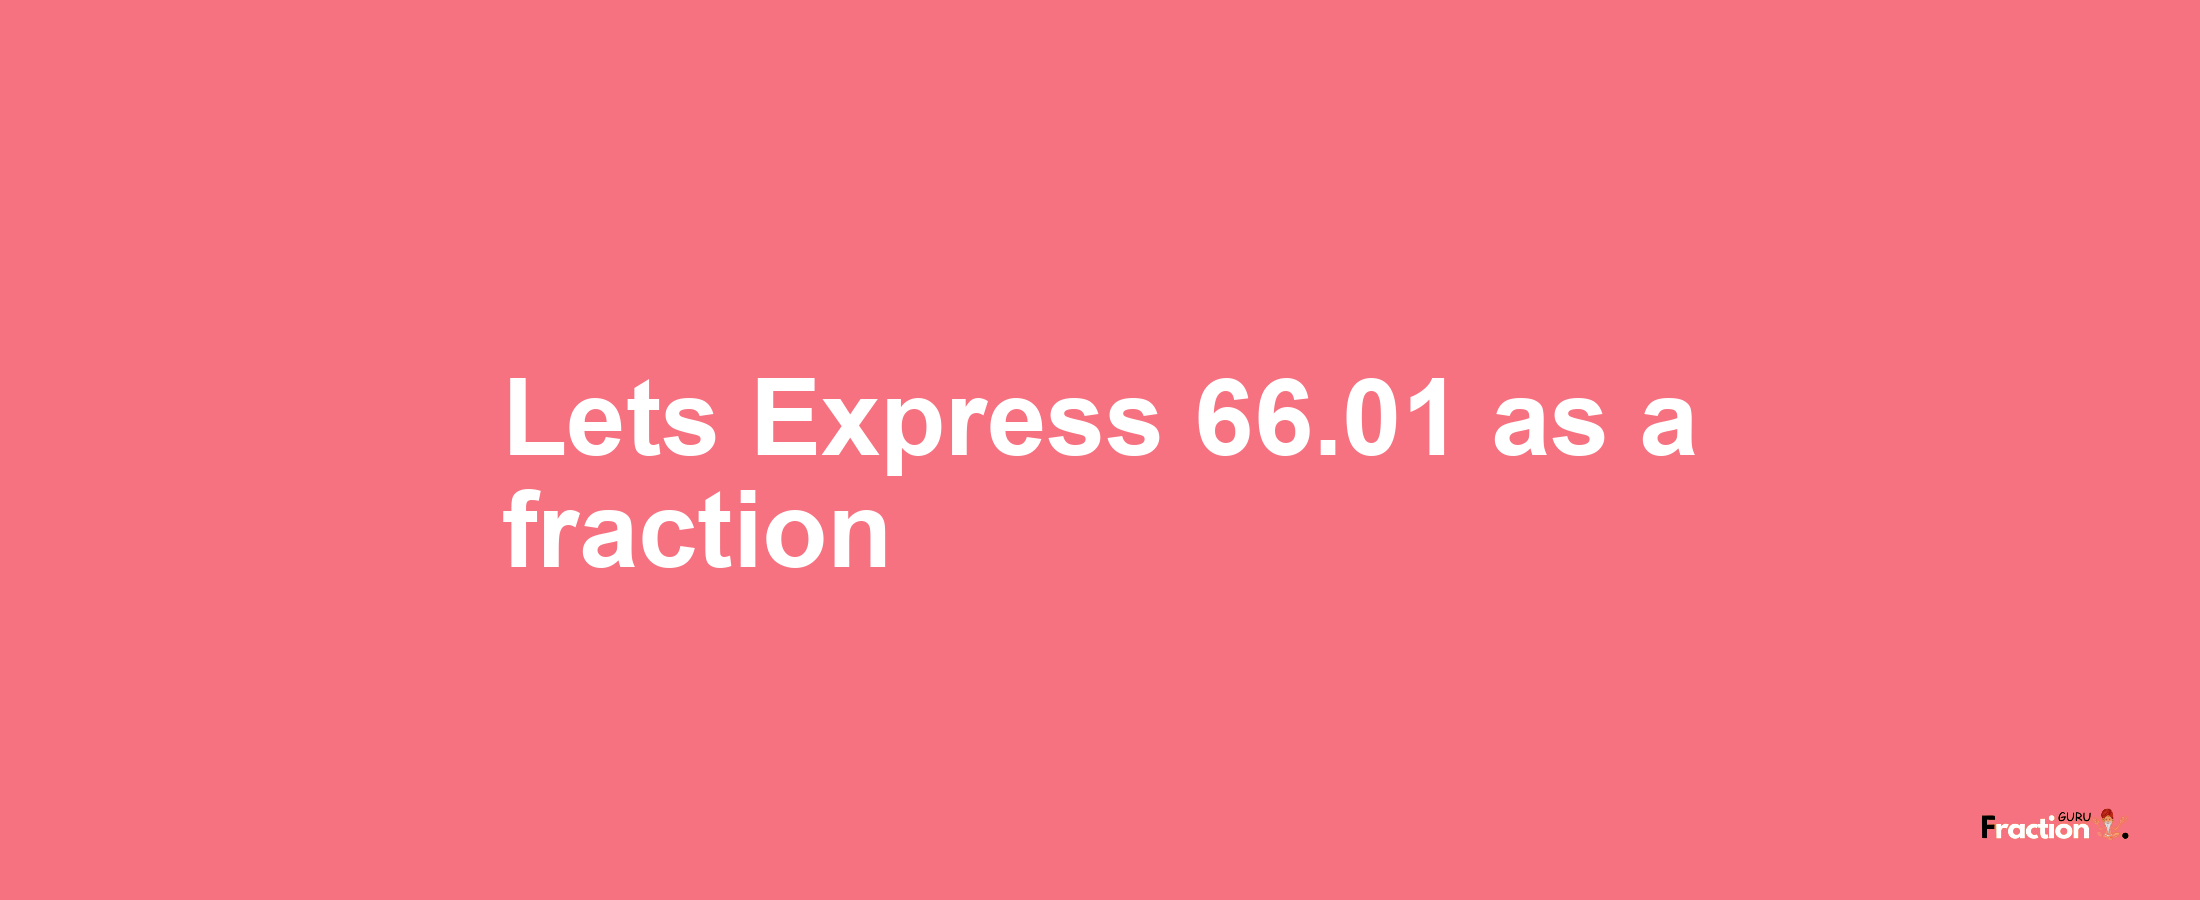 Lets Express 66.01 as afraction